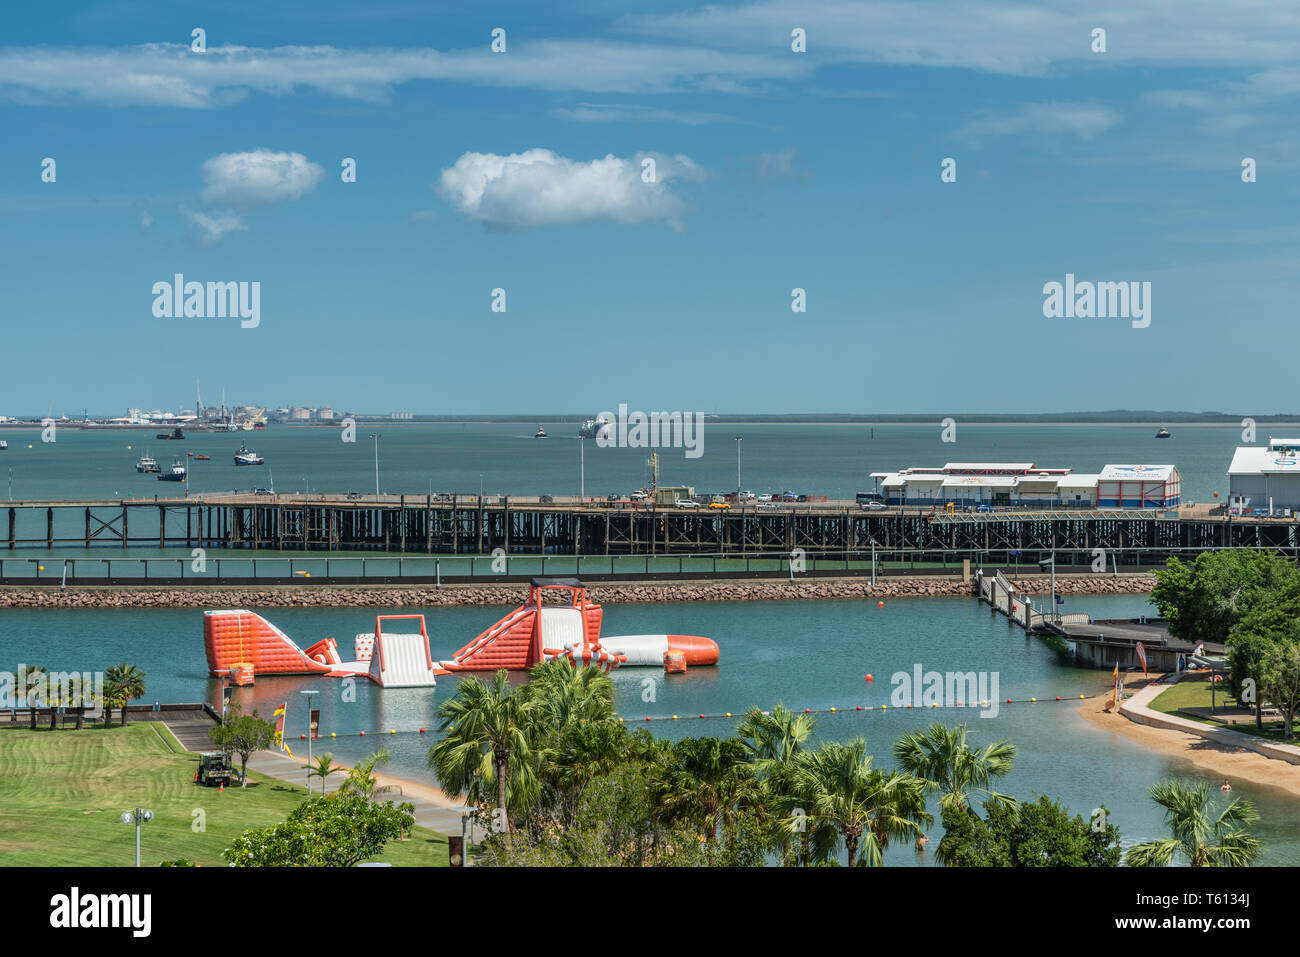 Darwin Australia - February 22, 2019: Big Buoy Water Park with red and white water slide in center of harbour showing boats, warehouses and green zone Stock Photo